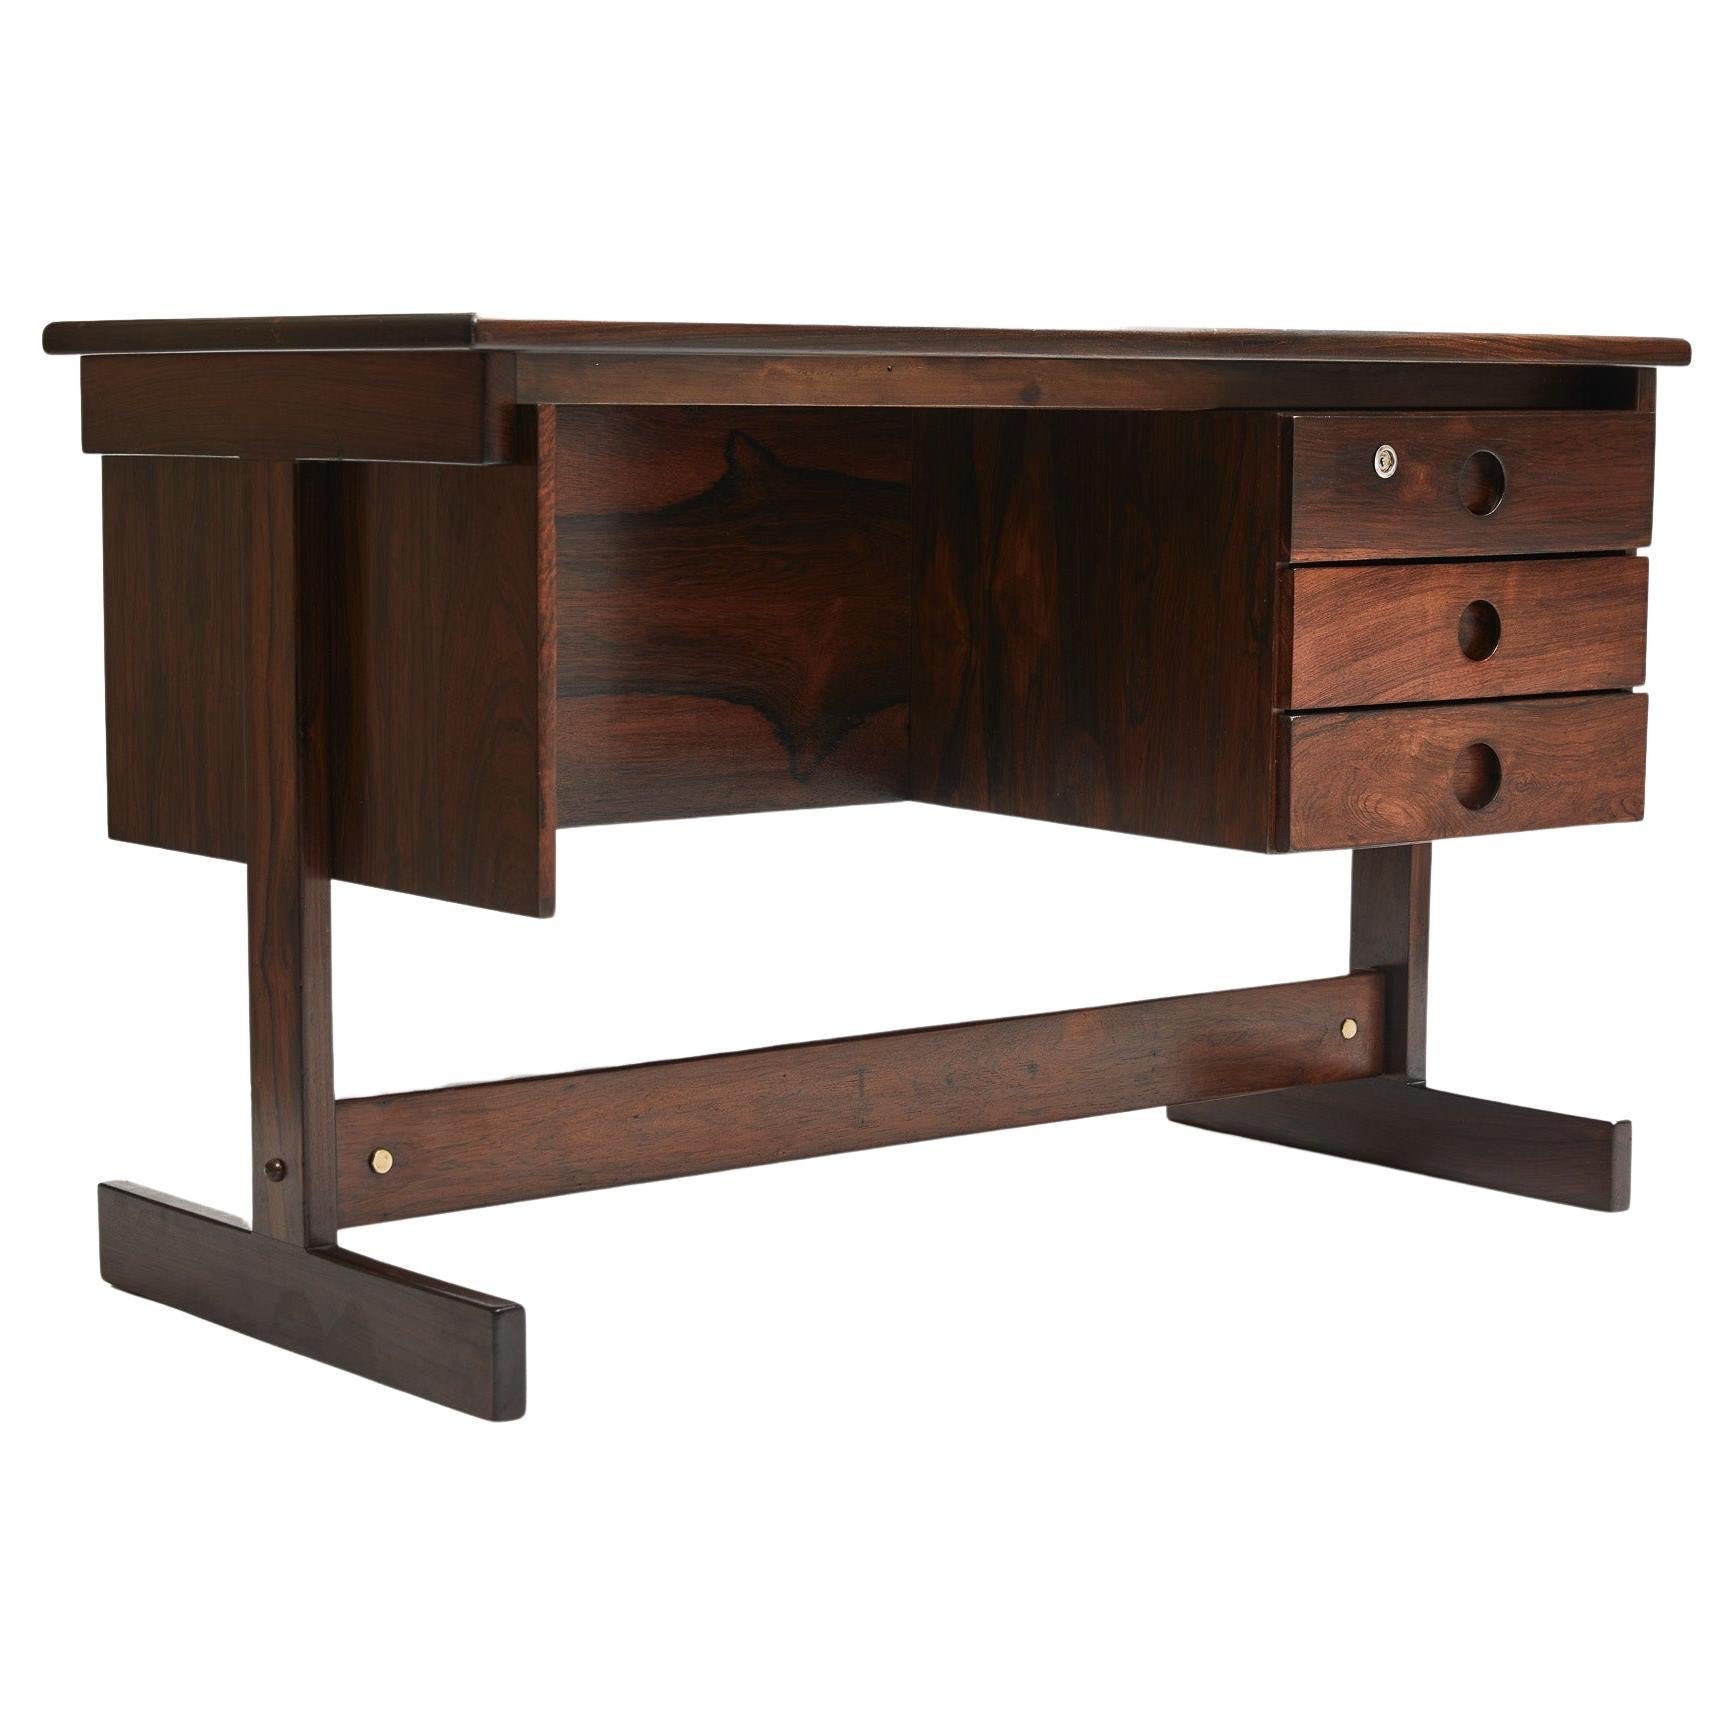 This Brazilian Modern Desk designed by Sergio Rodrigues is absolute stunning!

The structure has straight lines and is entirely made in solid Brazilian Rosewood (As known as Jacaranda) and white Formica on top. The Formica is new, and the wood has